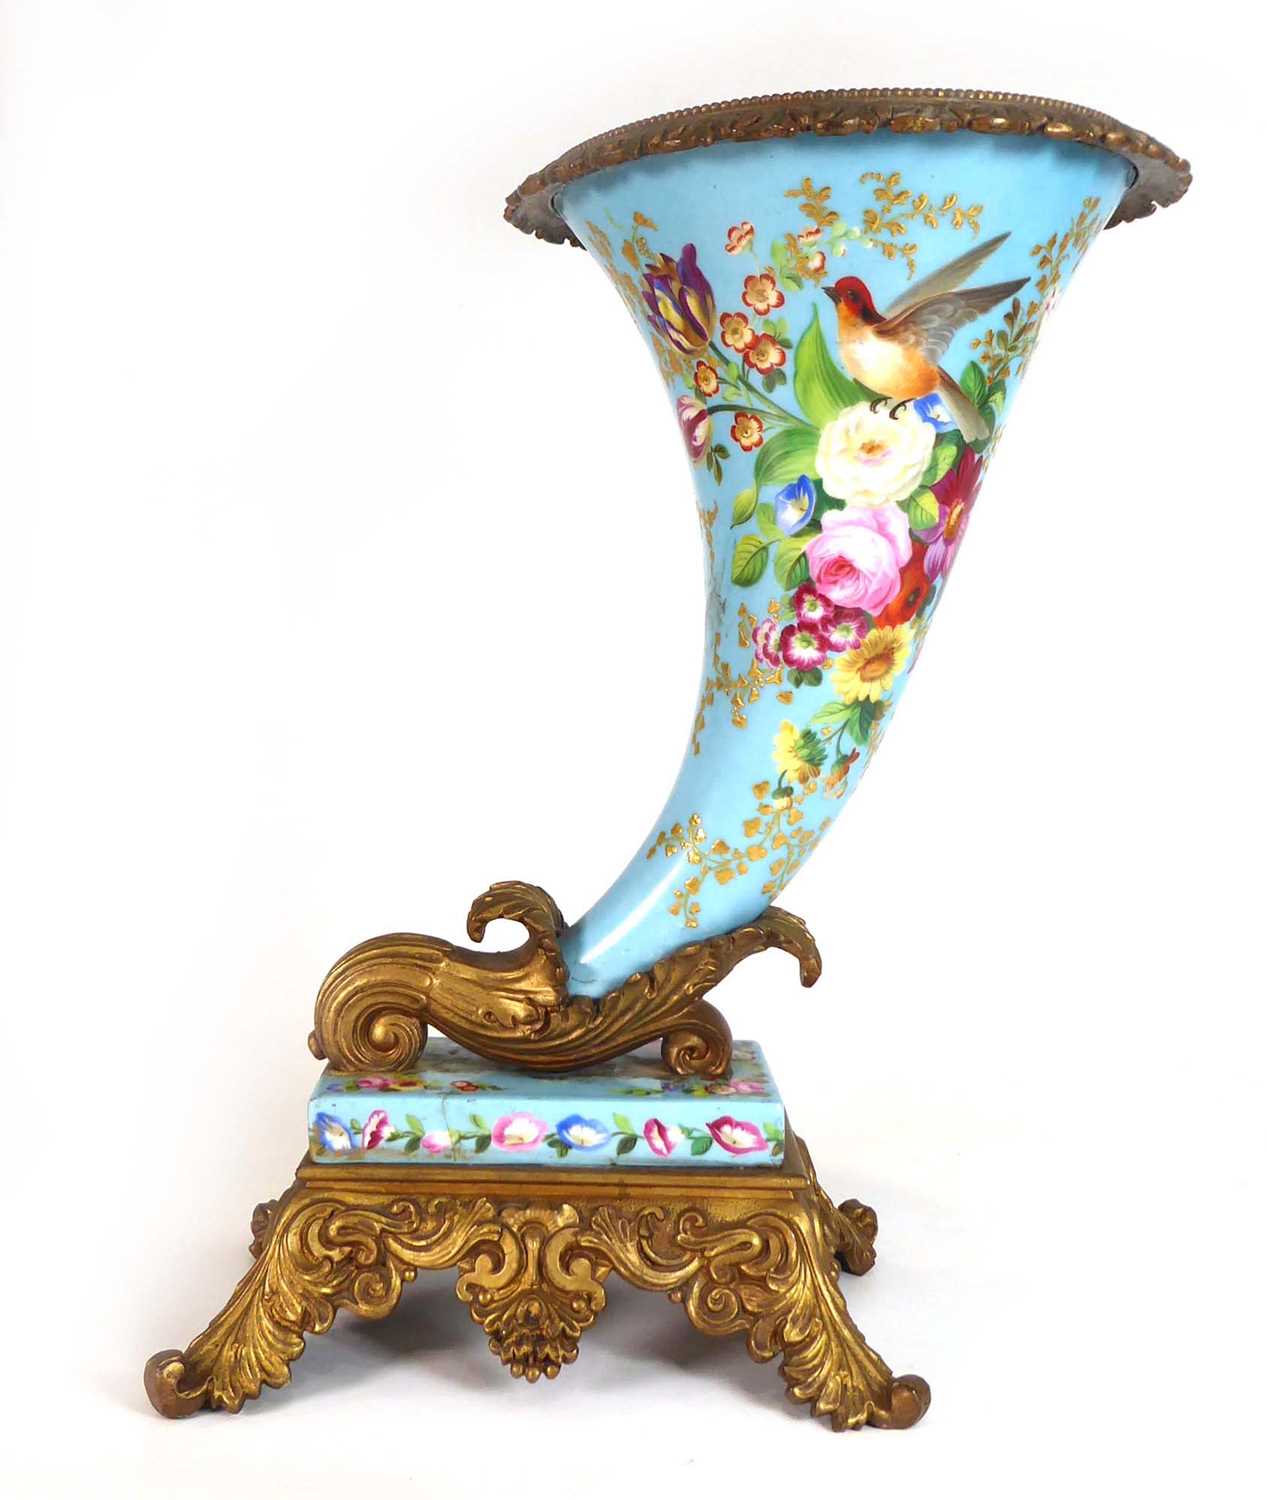 A late 19th/early 20th century gilt metal mounted cornucopia vase decorated with floral sprays and